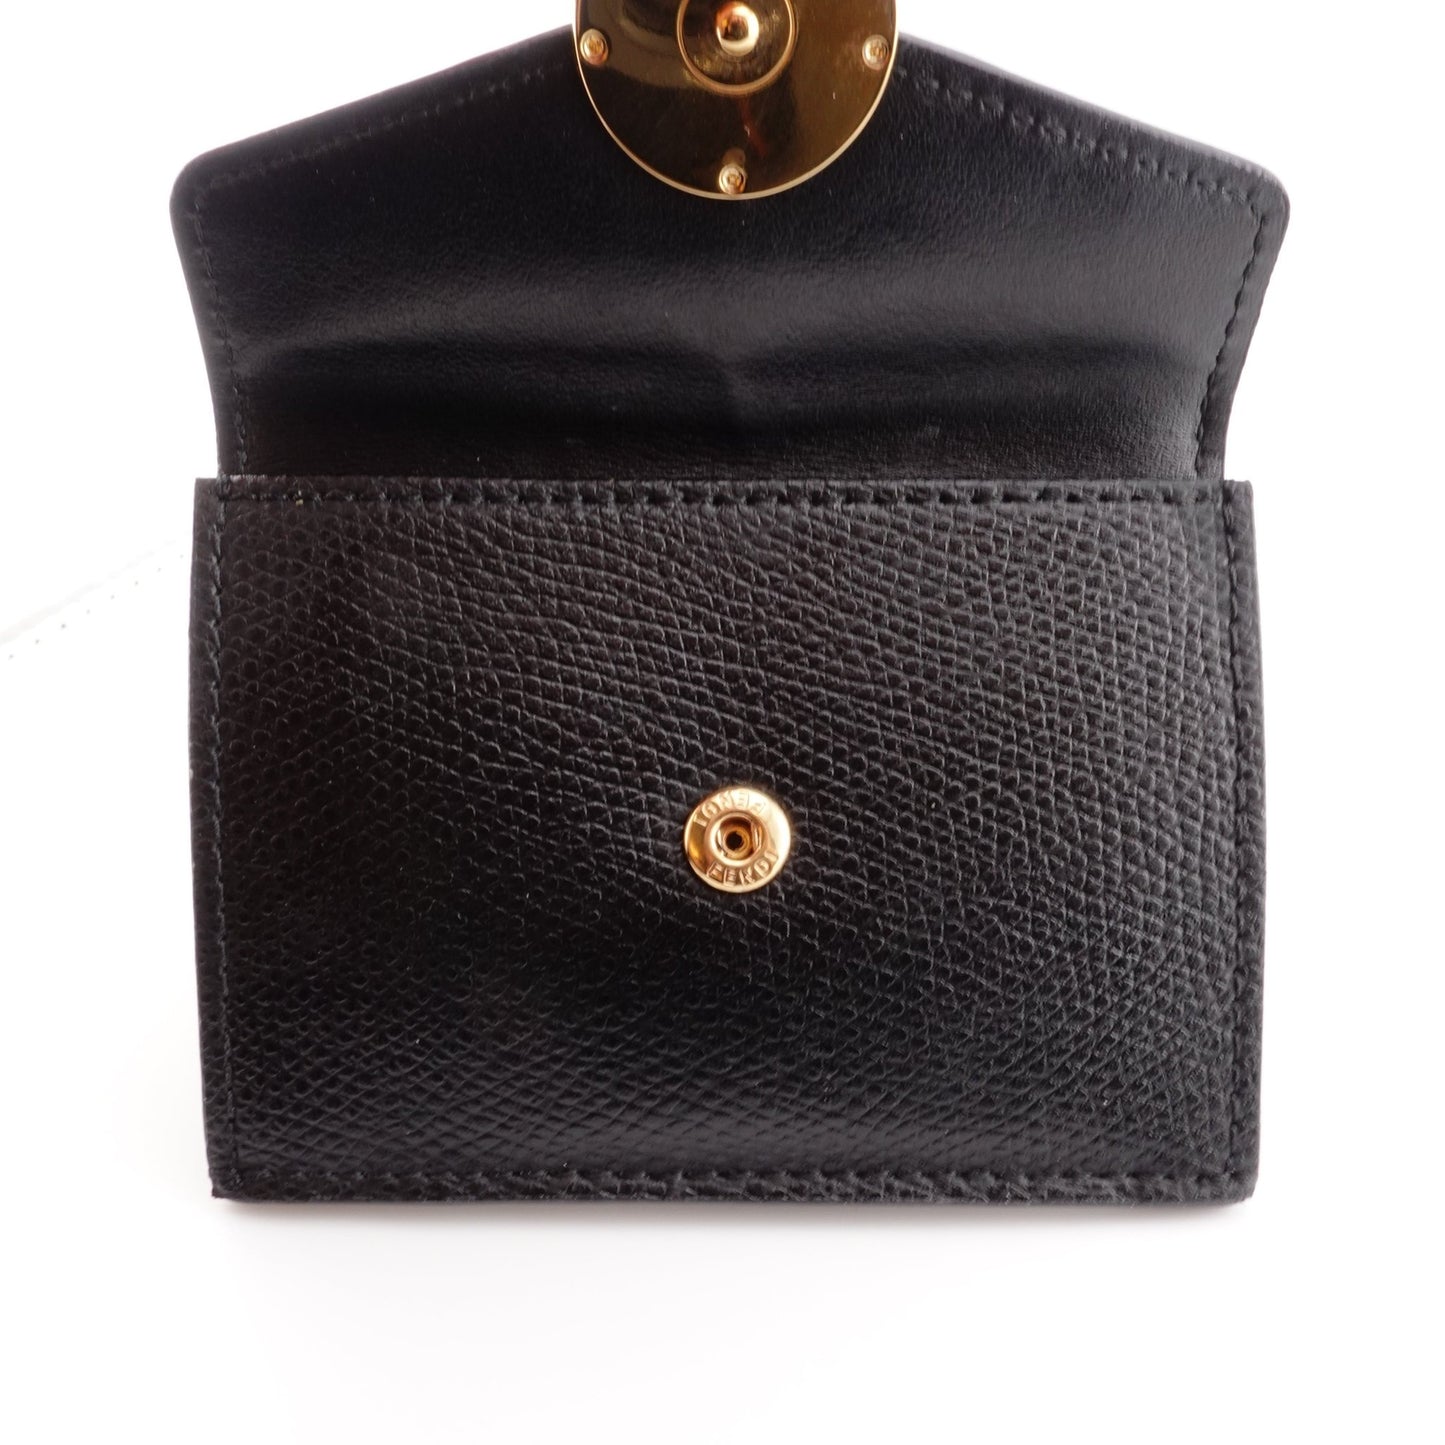 FENDI Leather Compact Trifold Wallet on Adjustable Chain - Bag Envy